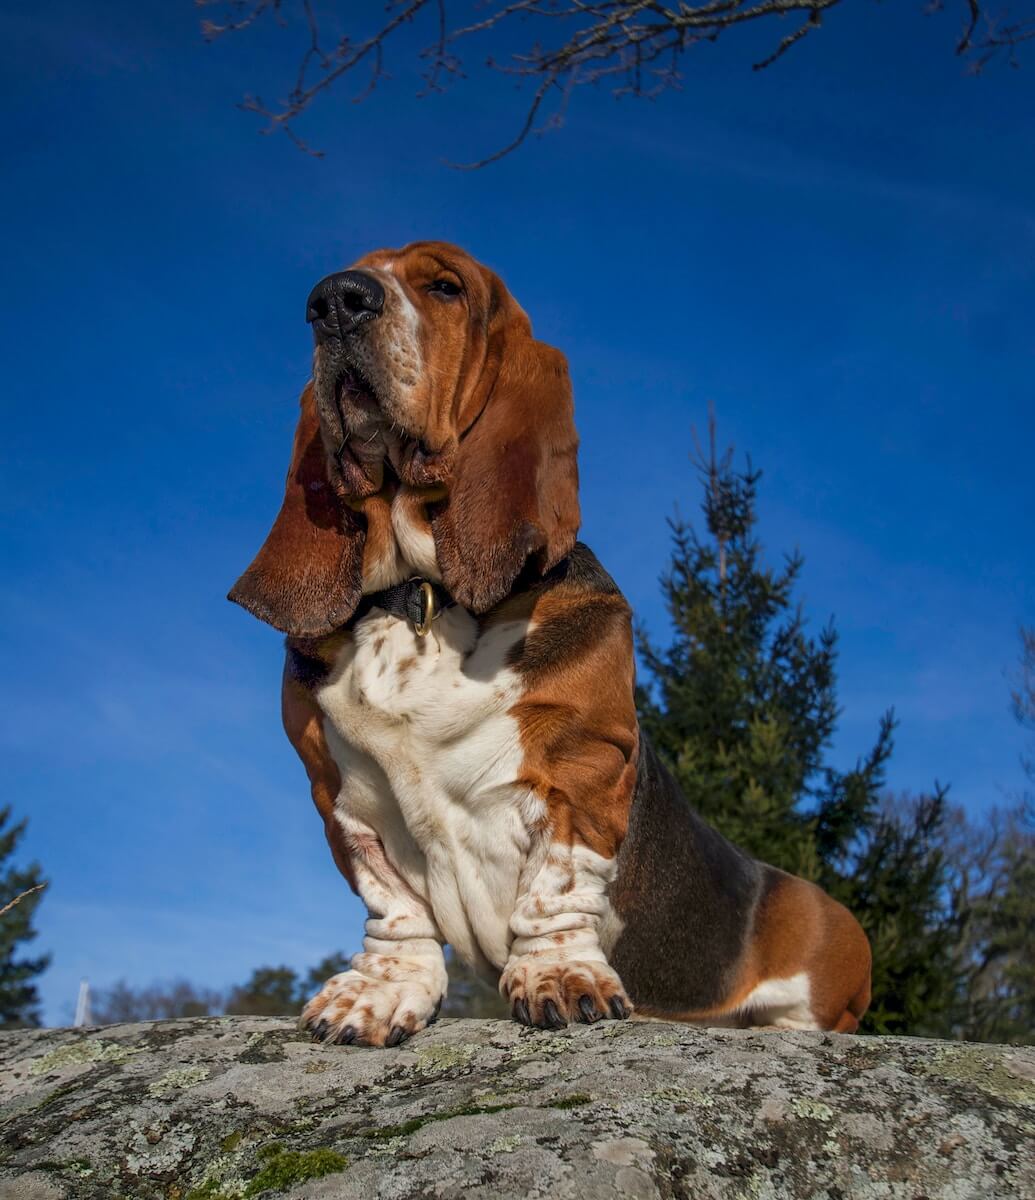 Basset Hound perched on a rock photo by Leni Thalin on Unsplash